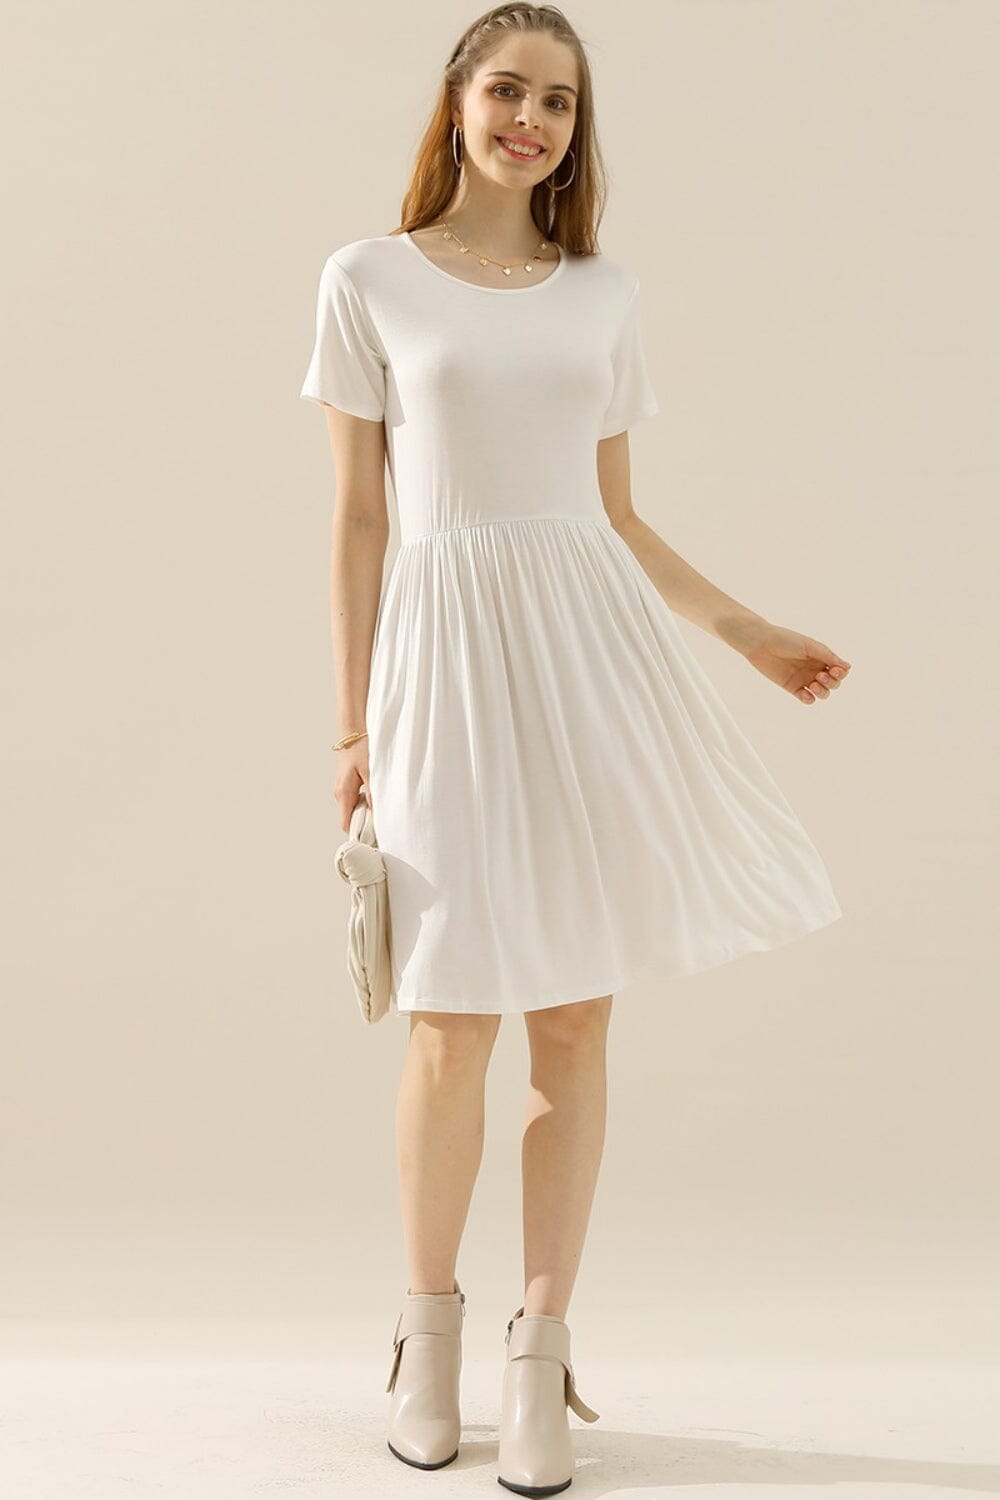 Ninexis Round Neck Ruched Dress with Pockets Dresses jehouze WHITE S 